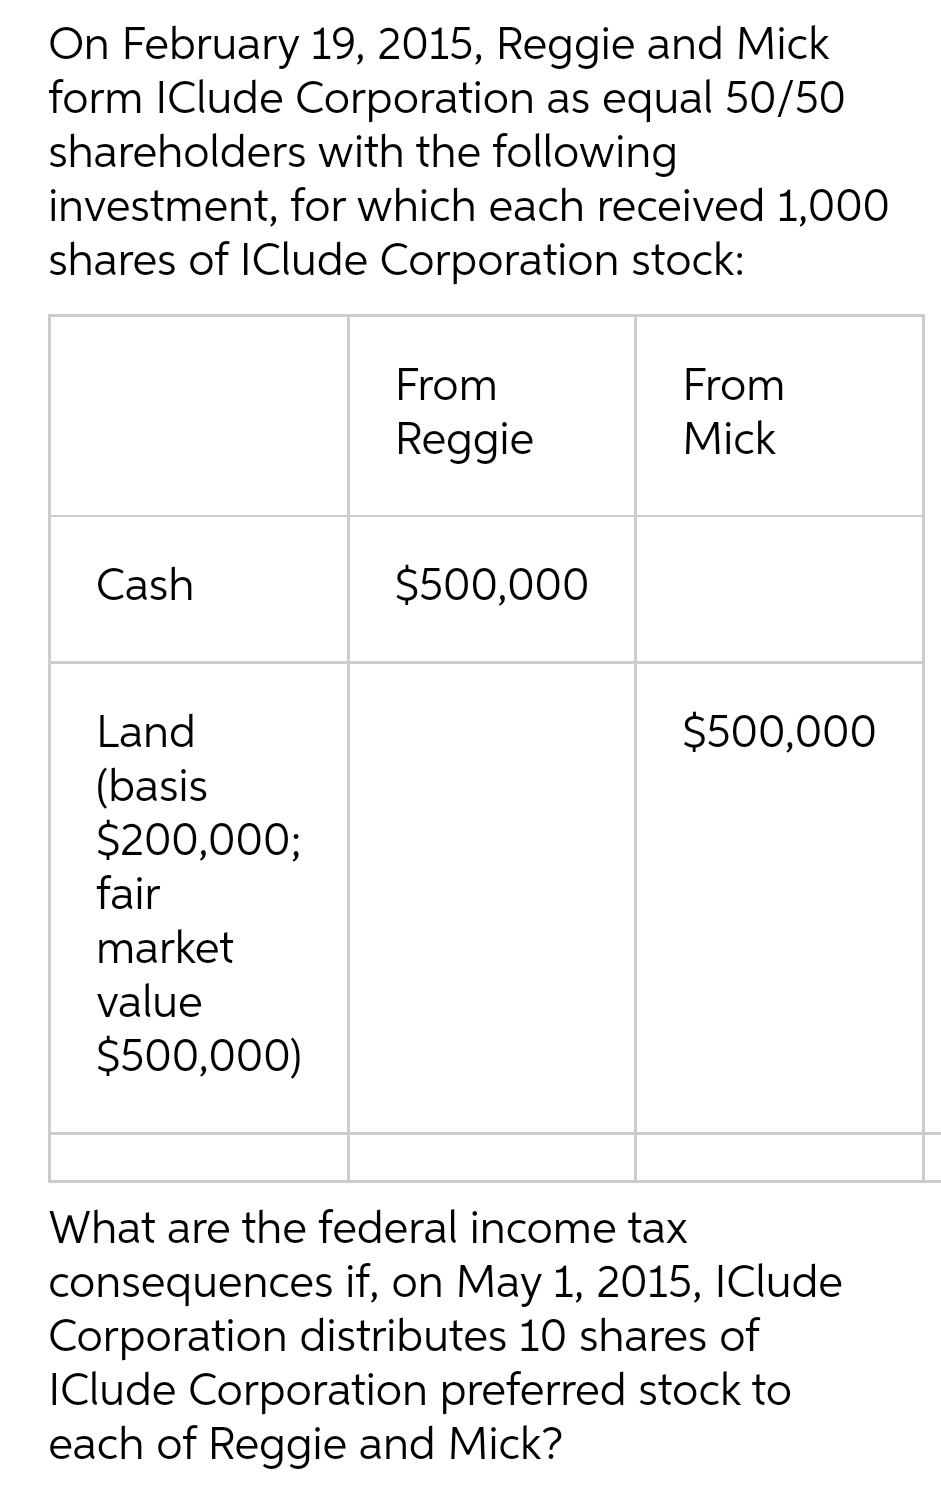 On February 19, 2015, Reggie and Mick
form IClude Corporation as equal 50/50
shareholders with the following
investment, for which each received 1,000
shares of IClude Corporation stock:
Cash
Land
(basis
$200,000;
fair
market
value
$500,000)
From
Reggie
$500,000
From
Mick
$500,000
What are the federal income tax
consequences if, on May 1, 2015, IClude
Corporation distributes 10 shares of
IClude Corporation preferred stock to
each of Reggie and Mick?